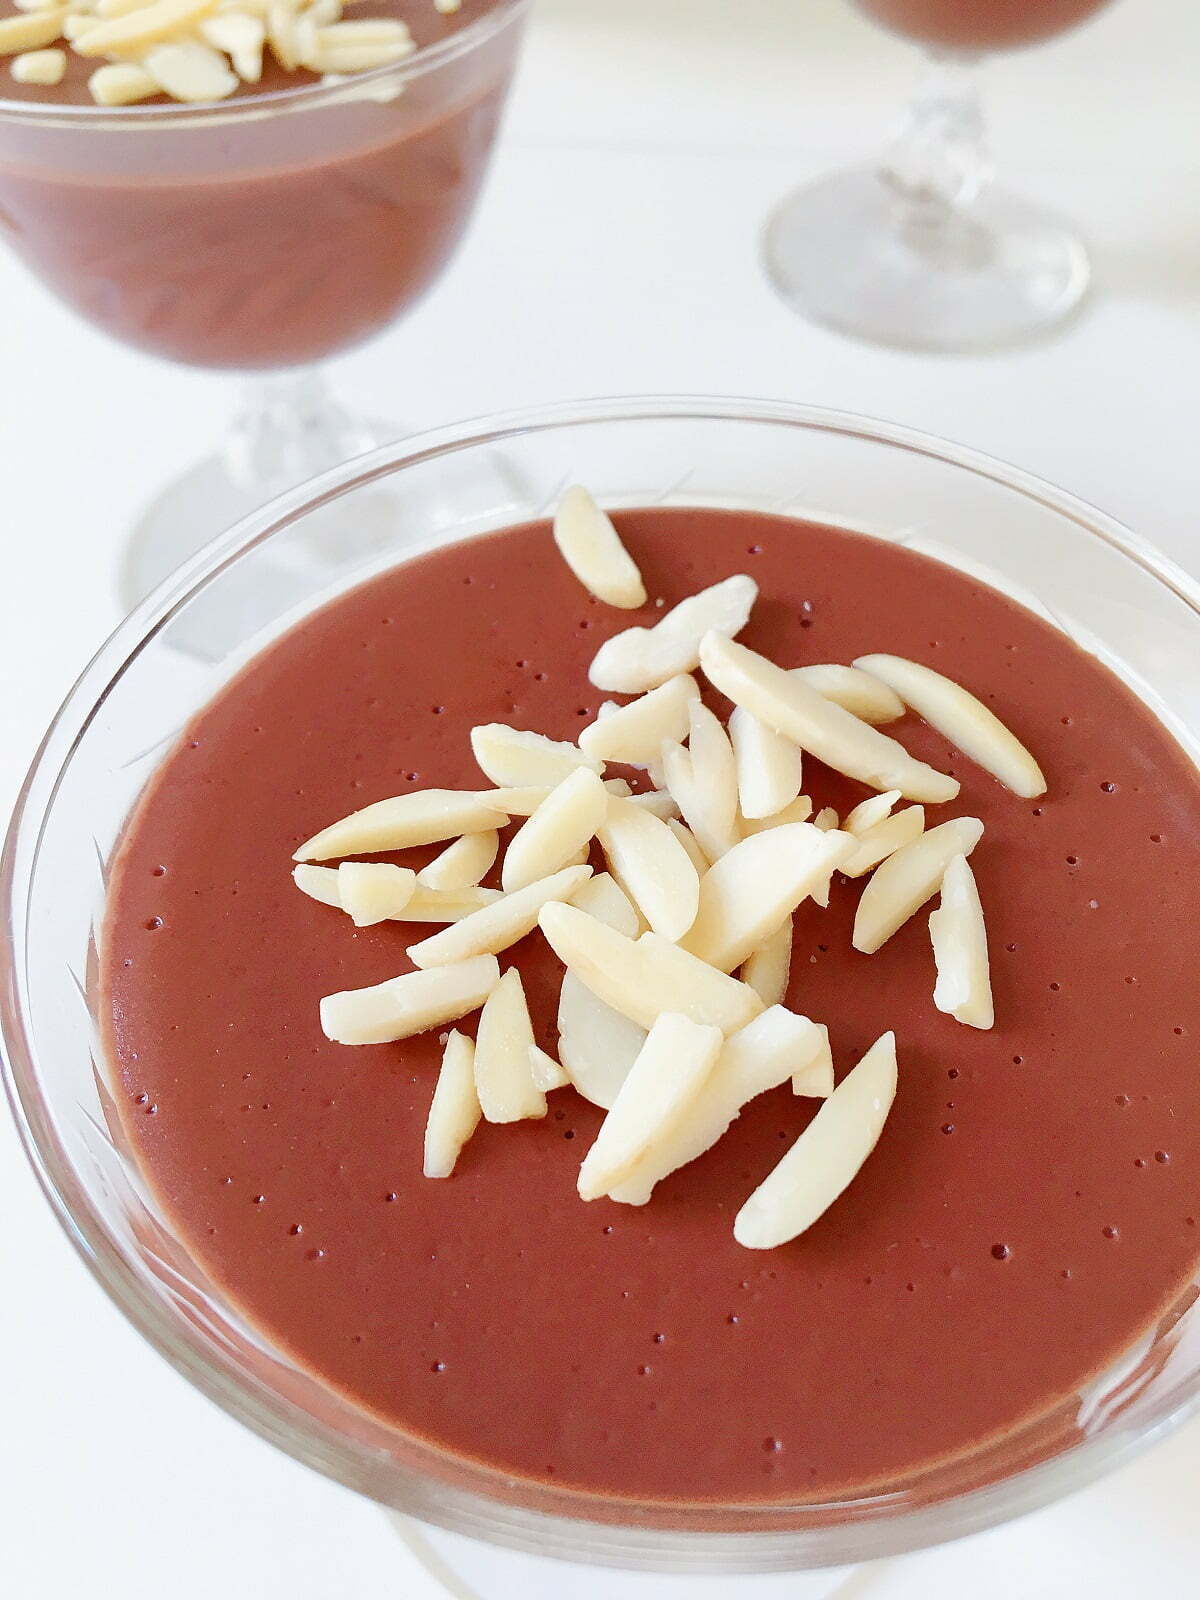 Silky Chocolate Pudding with Rum Explosion